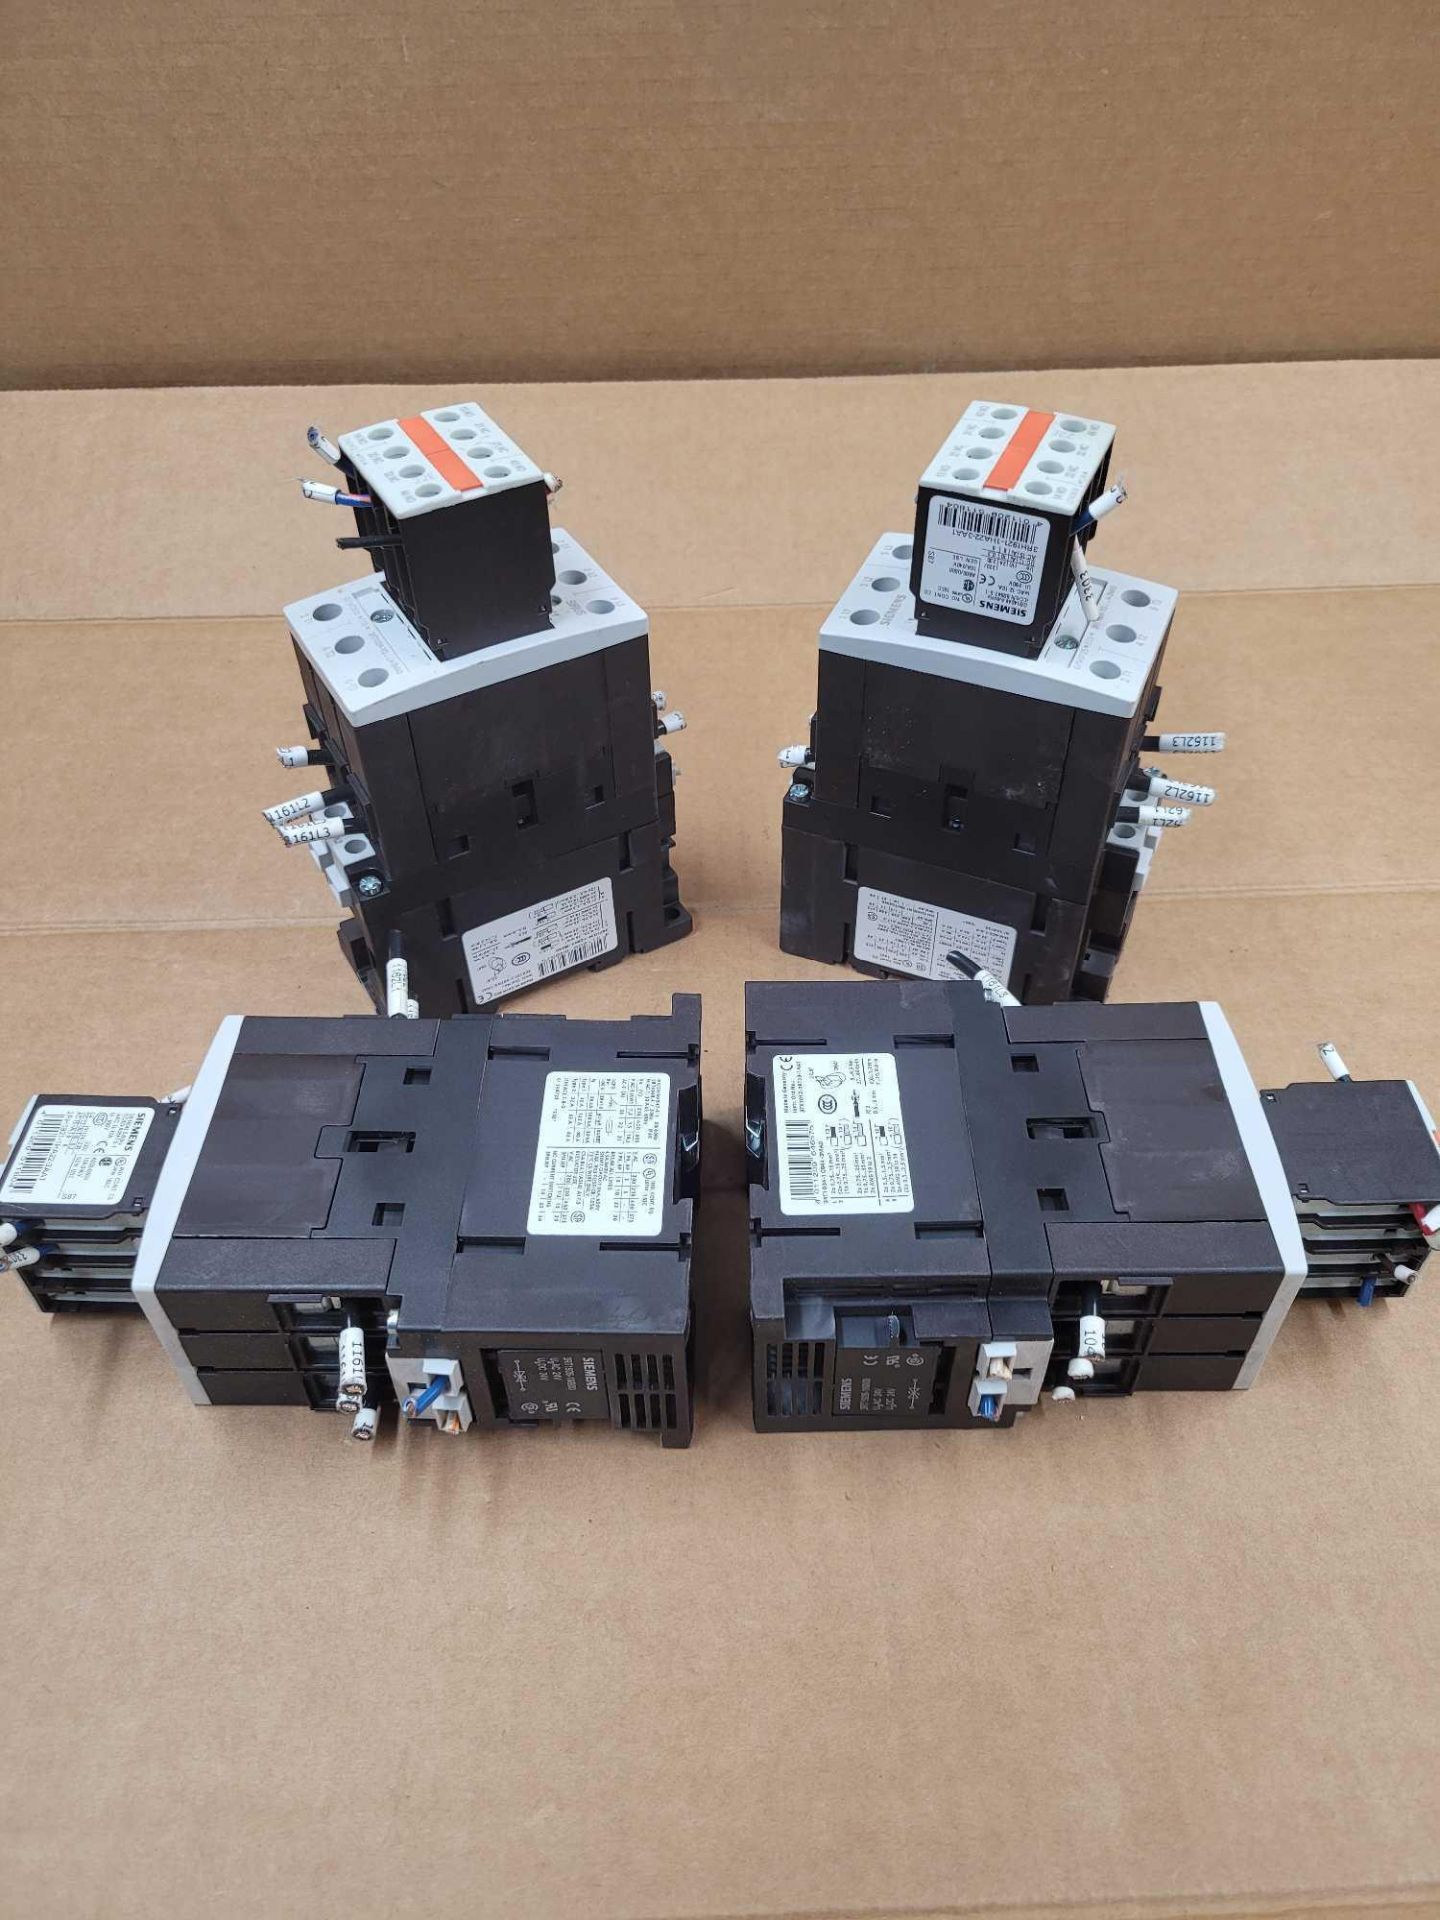 LOT OF 4 SIEMENS 3RT1034-1QB44-3MA0 / Power Contactor  /  Lot Weight: 13.2 lbs - Image 7 of 7